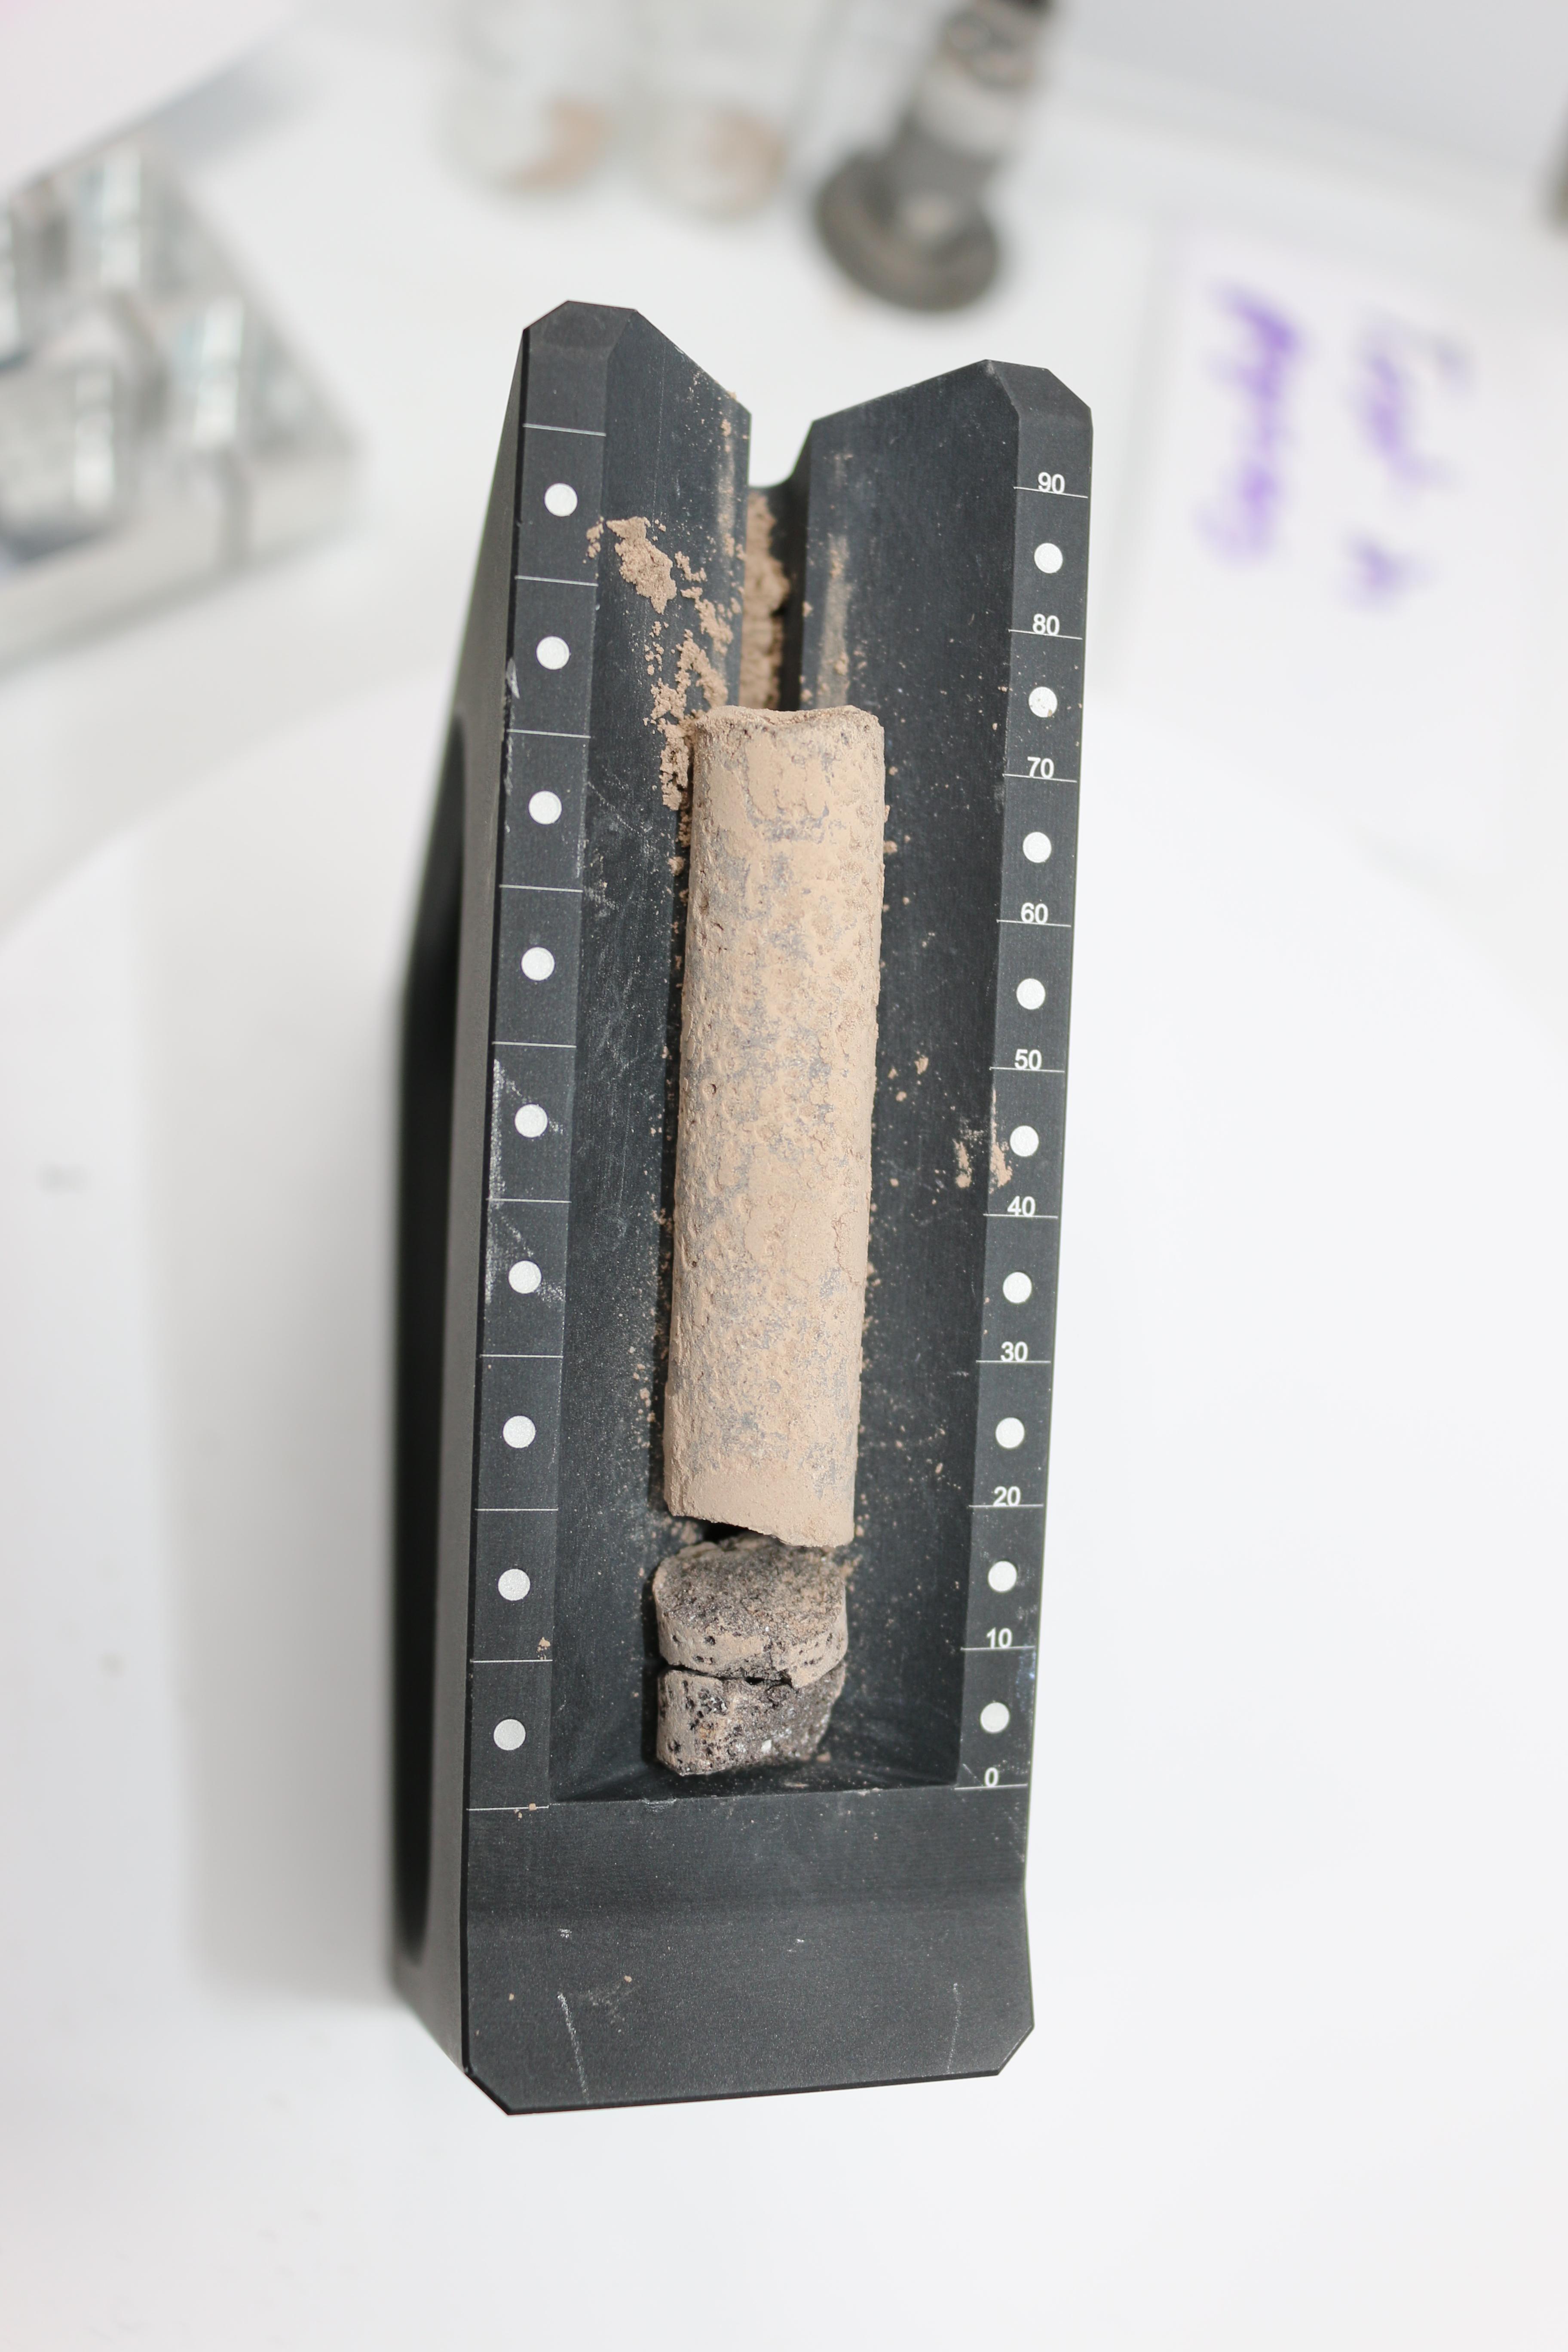 PIA24809: Cored-Rock Sample From Perseverance Test